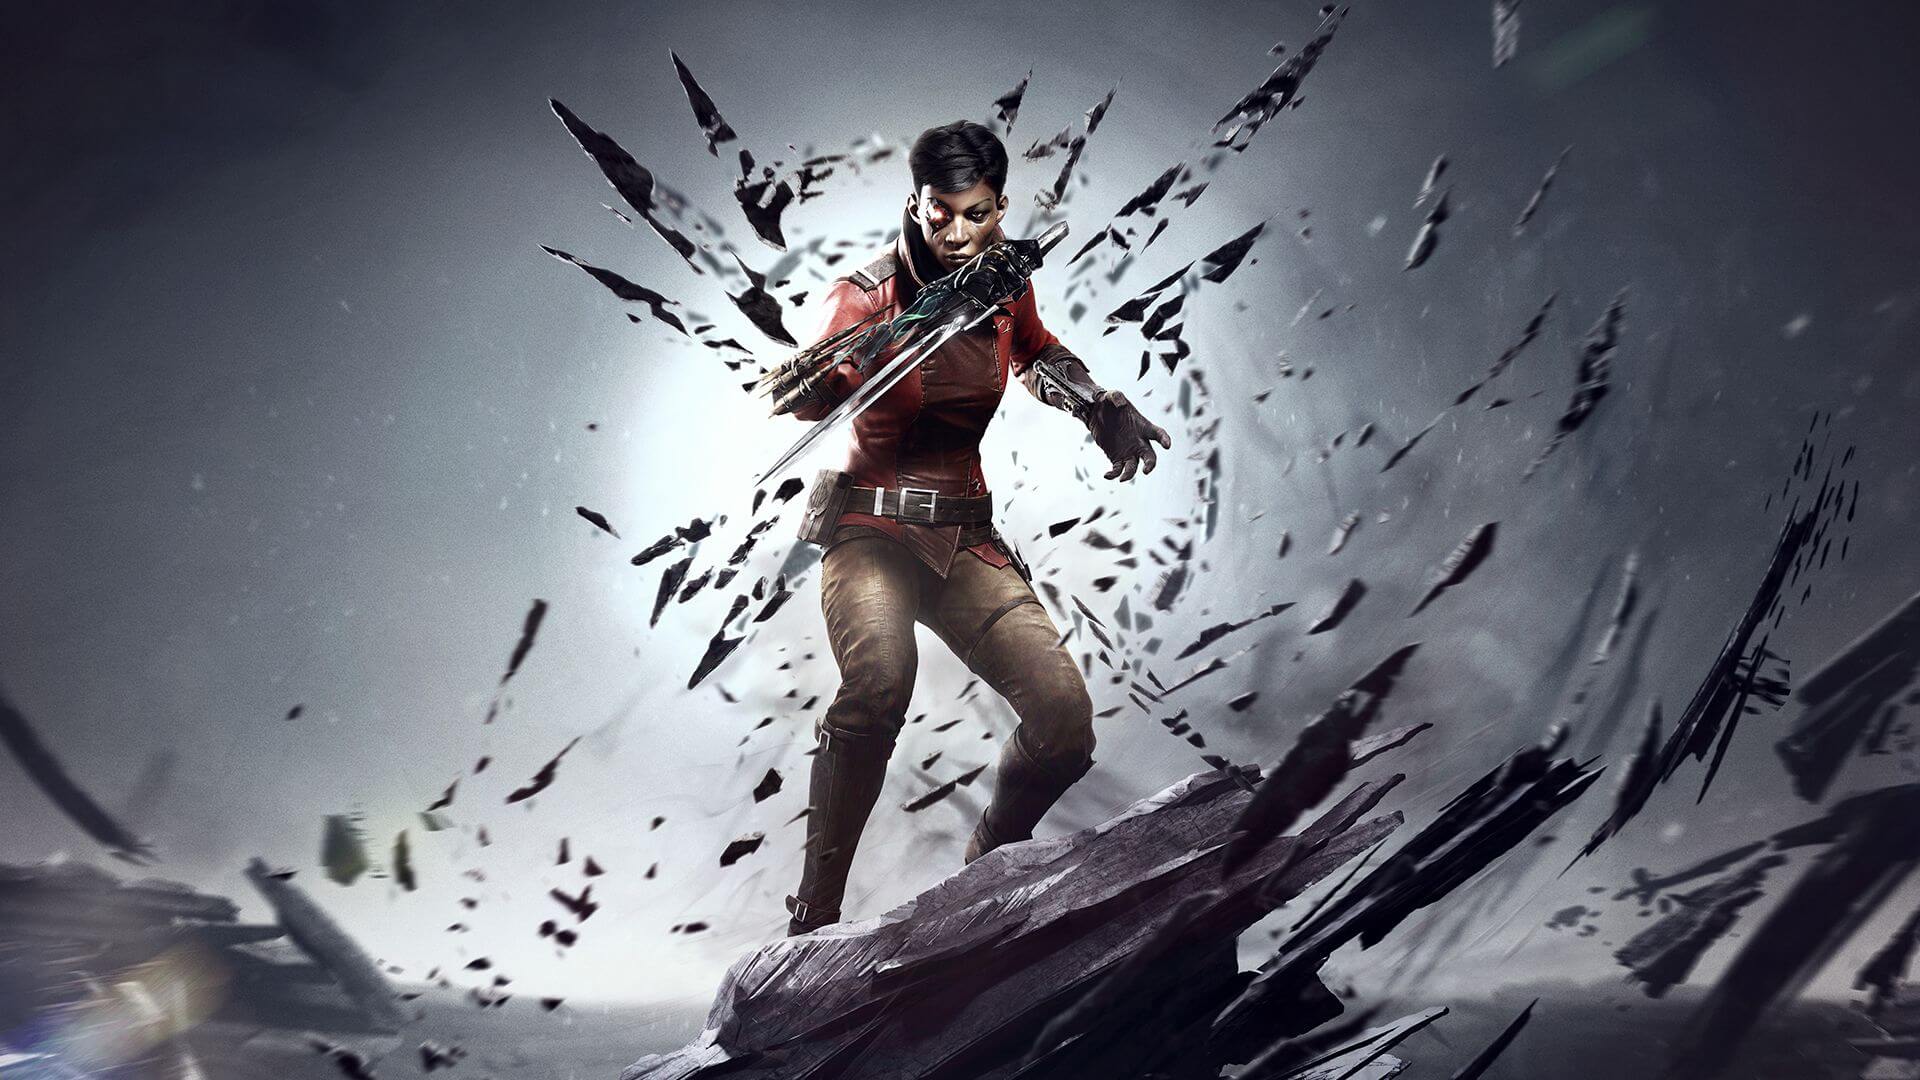 Dishonored Death of the outsider download free